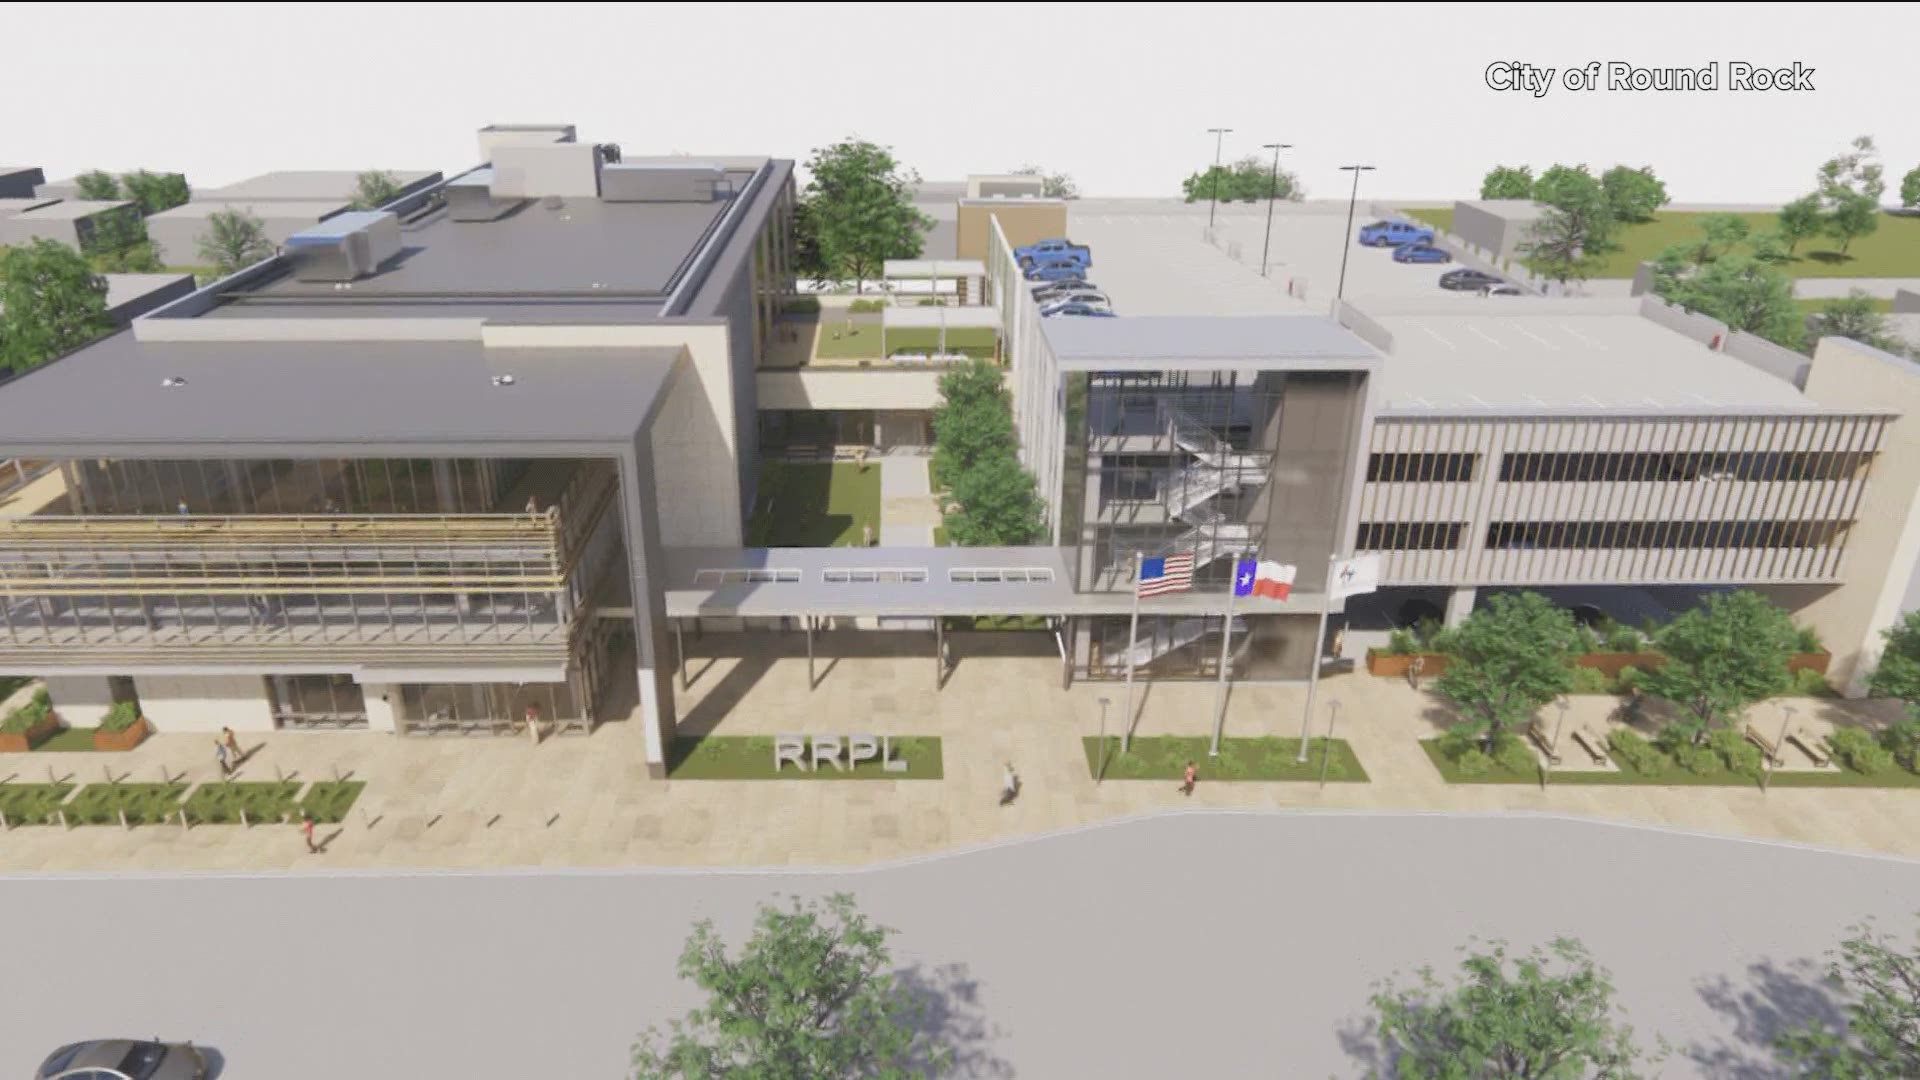 The new Round Rock library is set to be about 20,000-square-feet bigger than the original library.